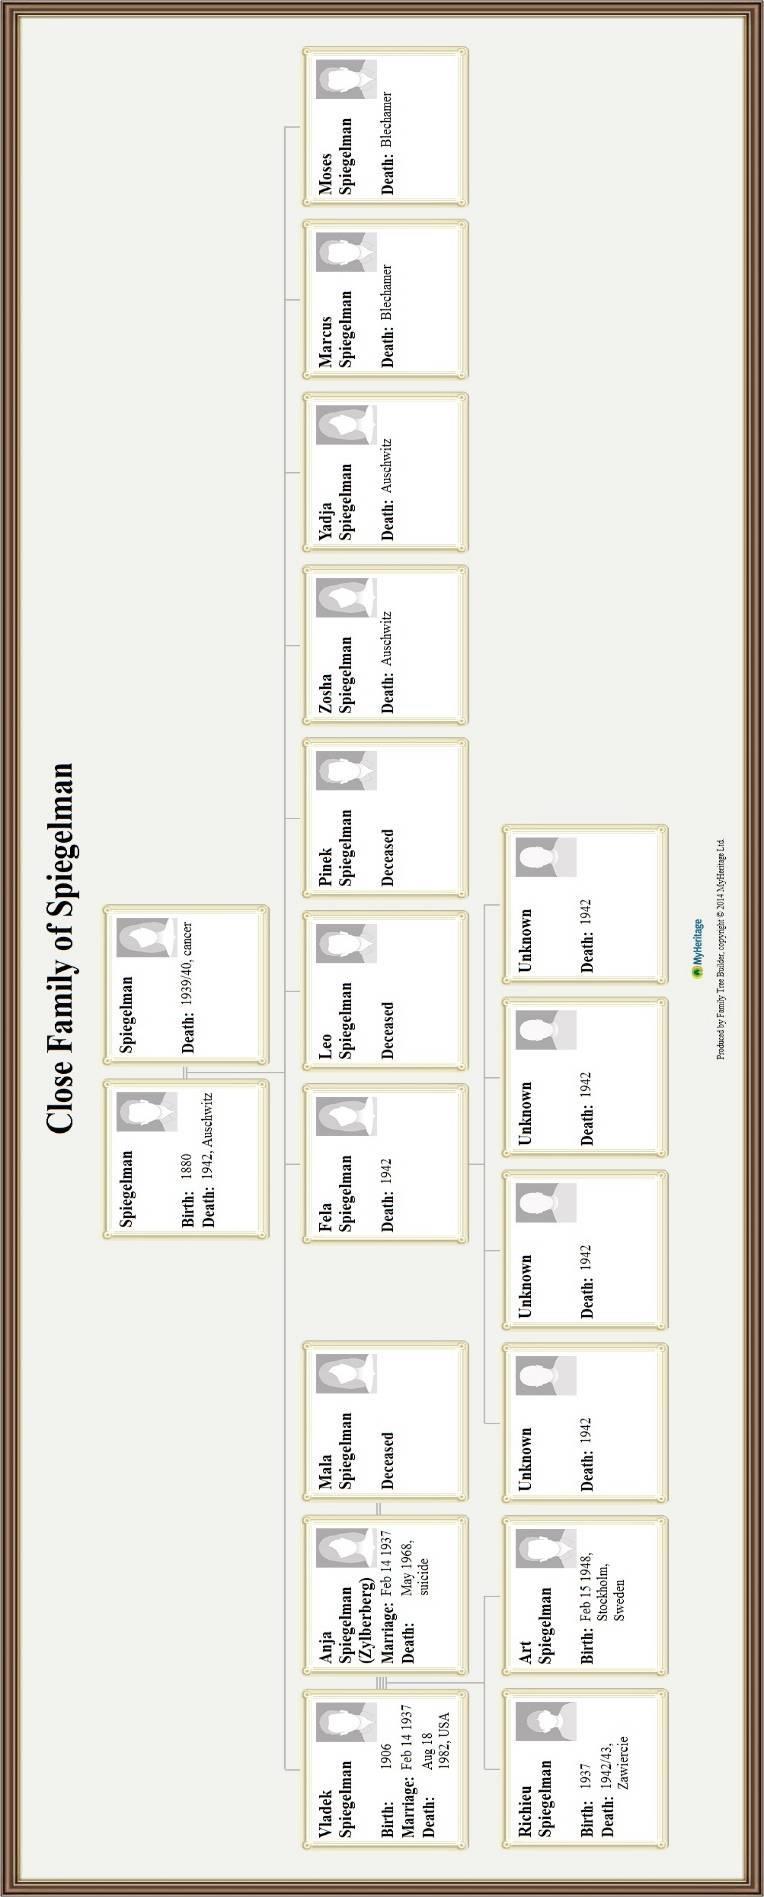 Picture 2: Genealogical Tree